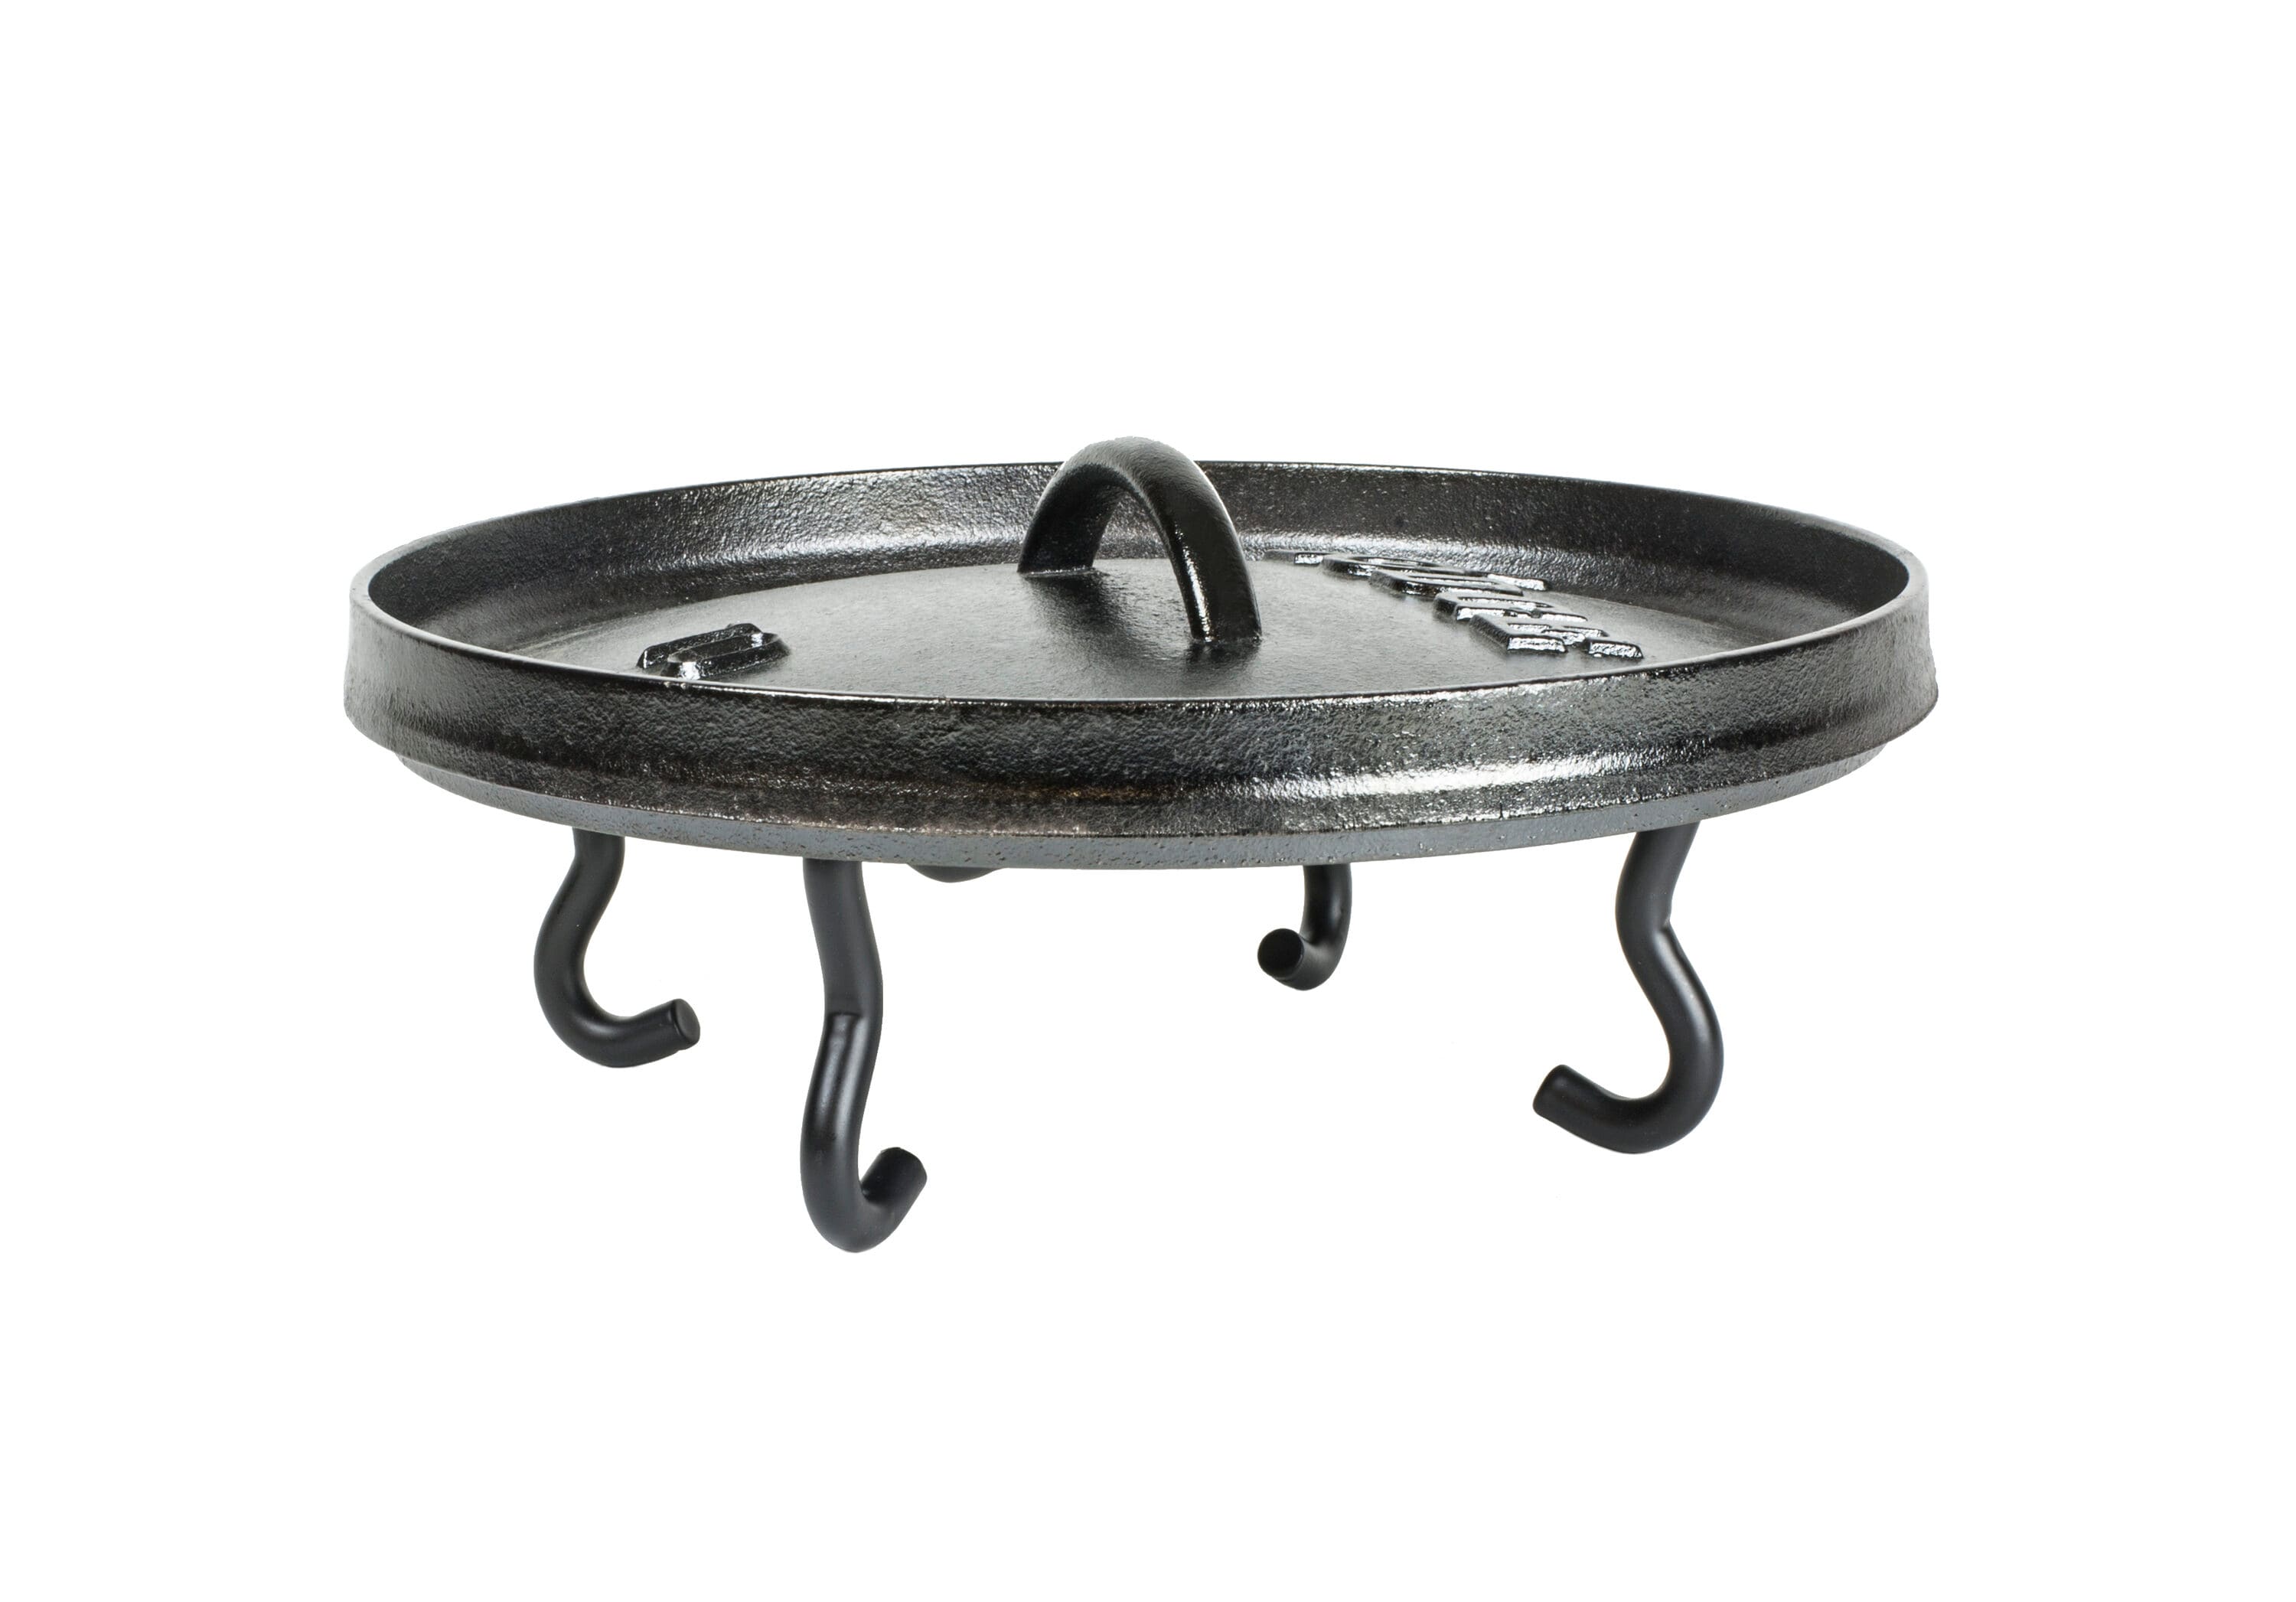 Lodge Deep Camp Dutch Oven, 8 Quart & Camp Dutch Oven Lid Lifter. Black 9  MM Bar Stock for Lifting and Carrying Dutch Ovens. (Black Finish)